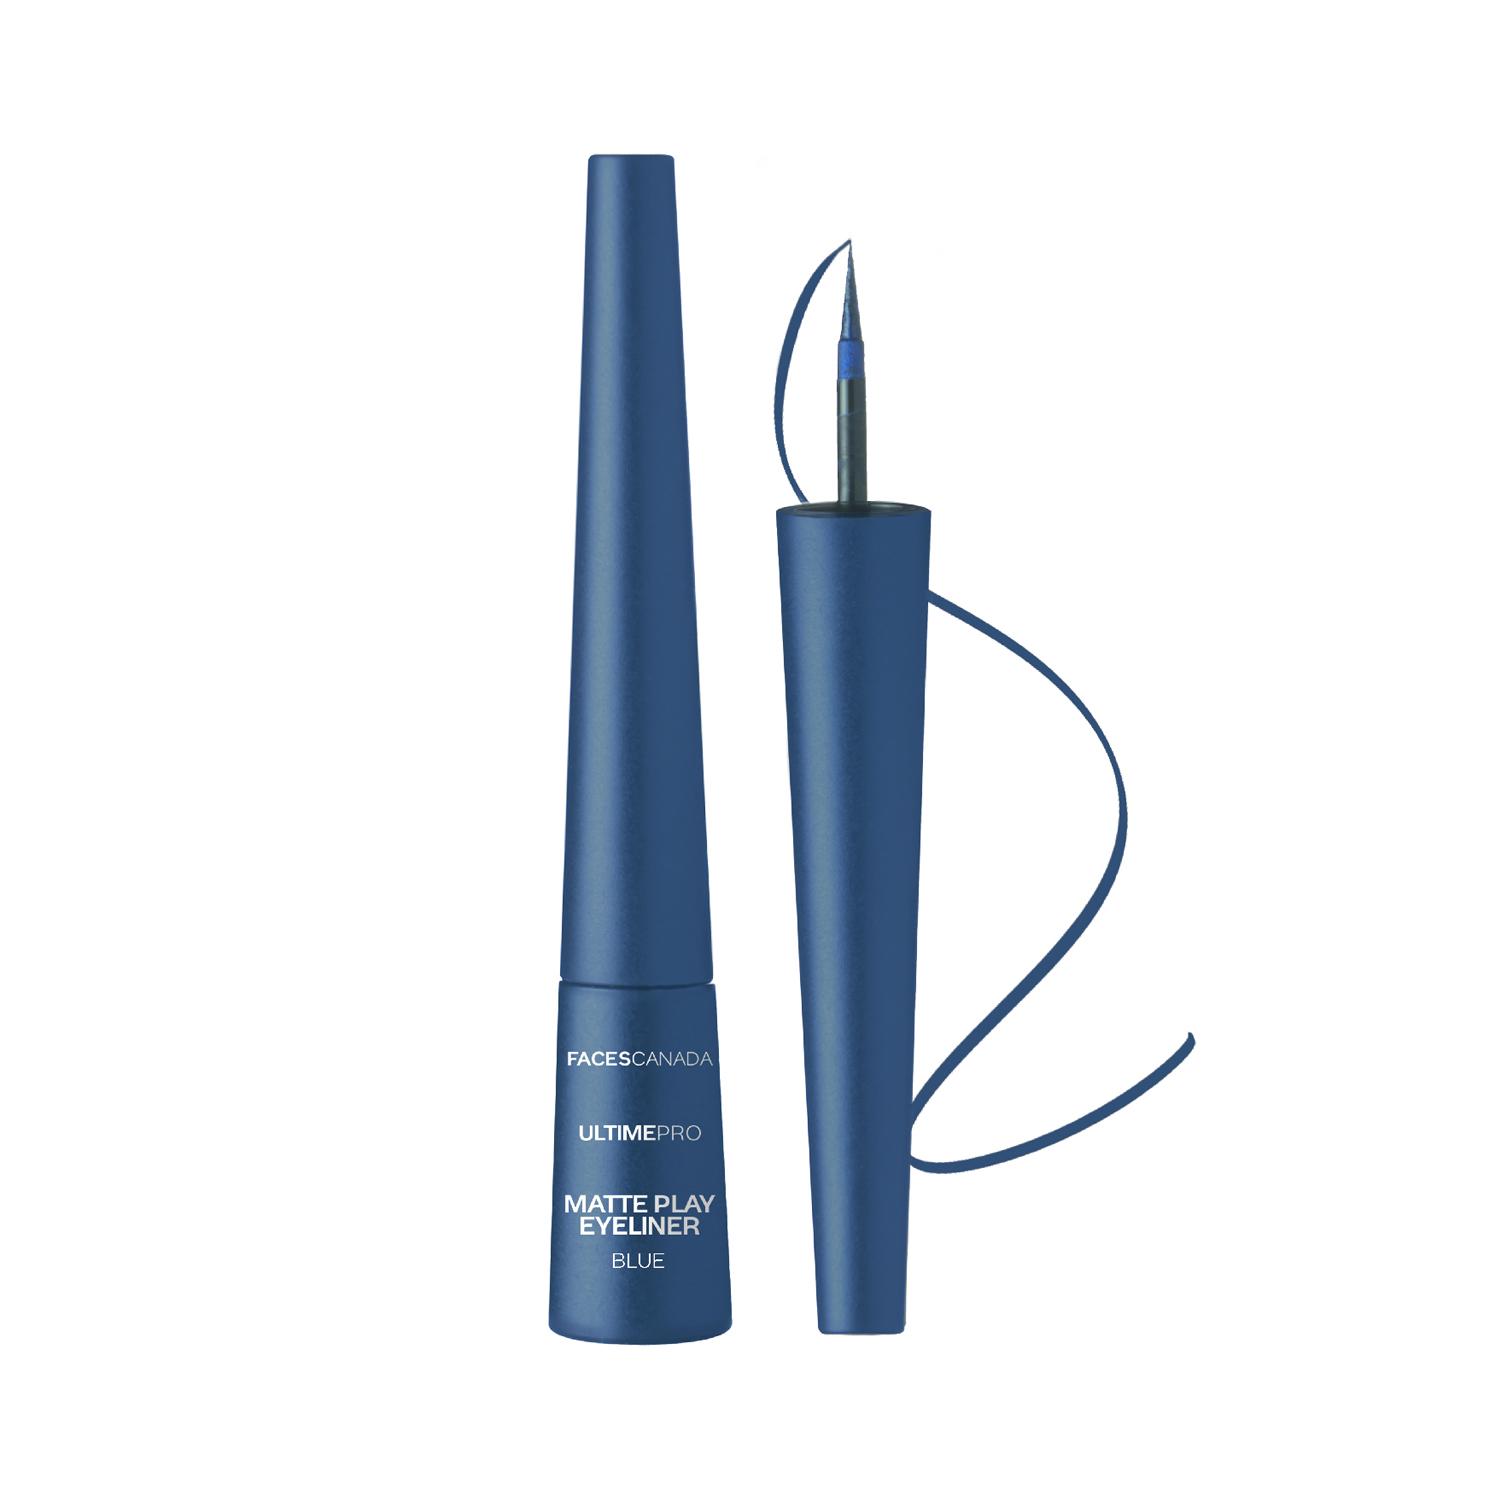 Faces Canada | Faces Canada Ultime Pro Matte Play Eyeliner - Sapphire (Blue), 24HR Long Stay Matte (2.5 ml)